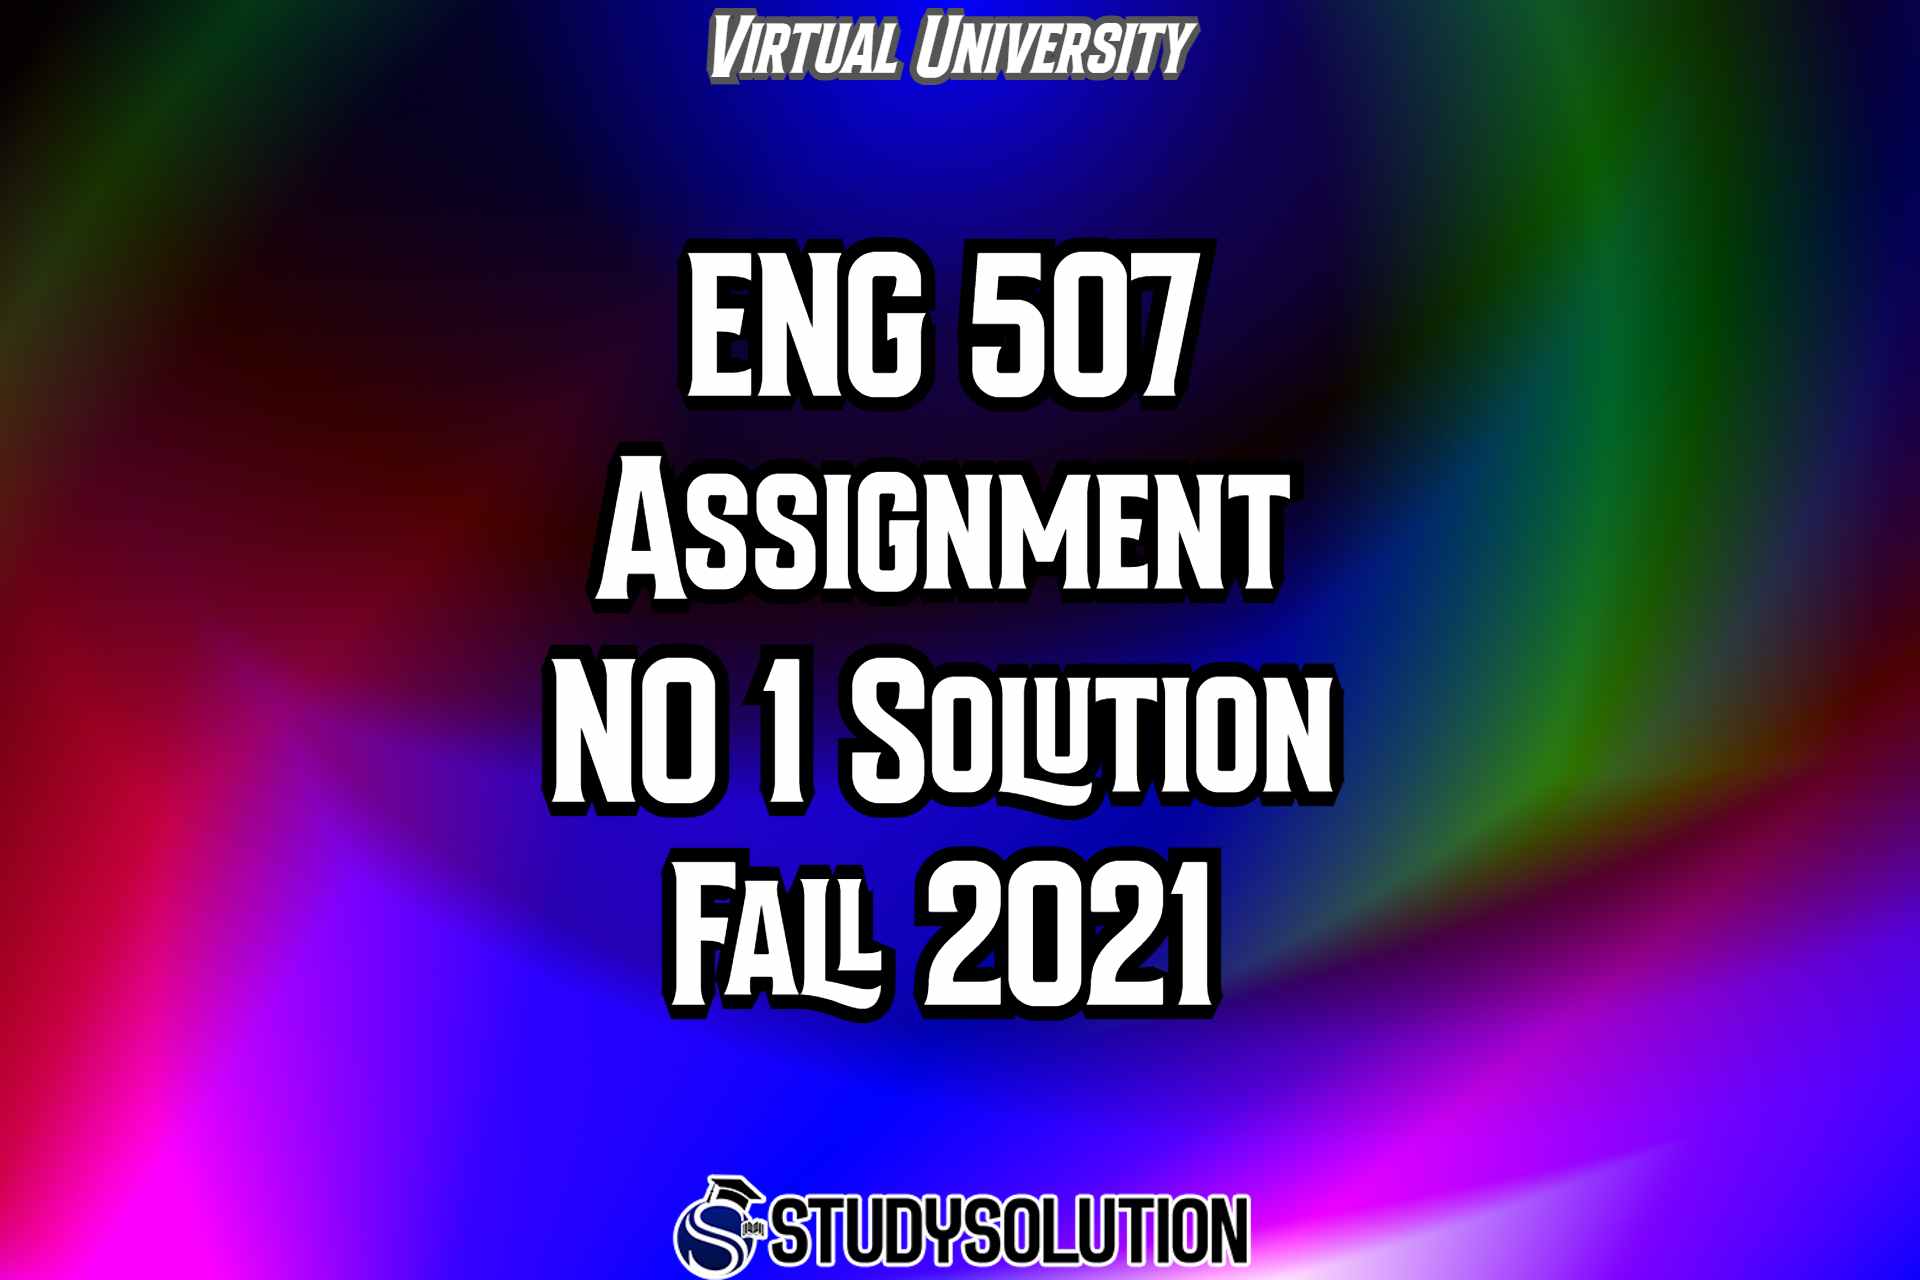 ENG507 Assignment NO 1 Solution Fall 2021